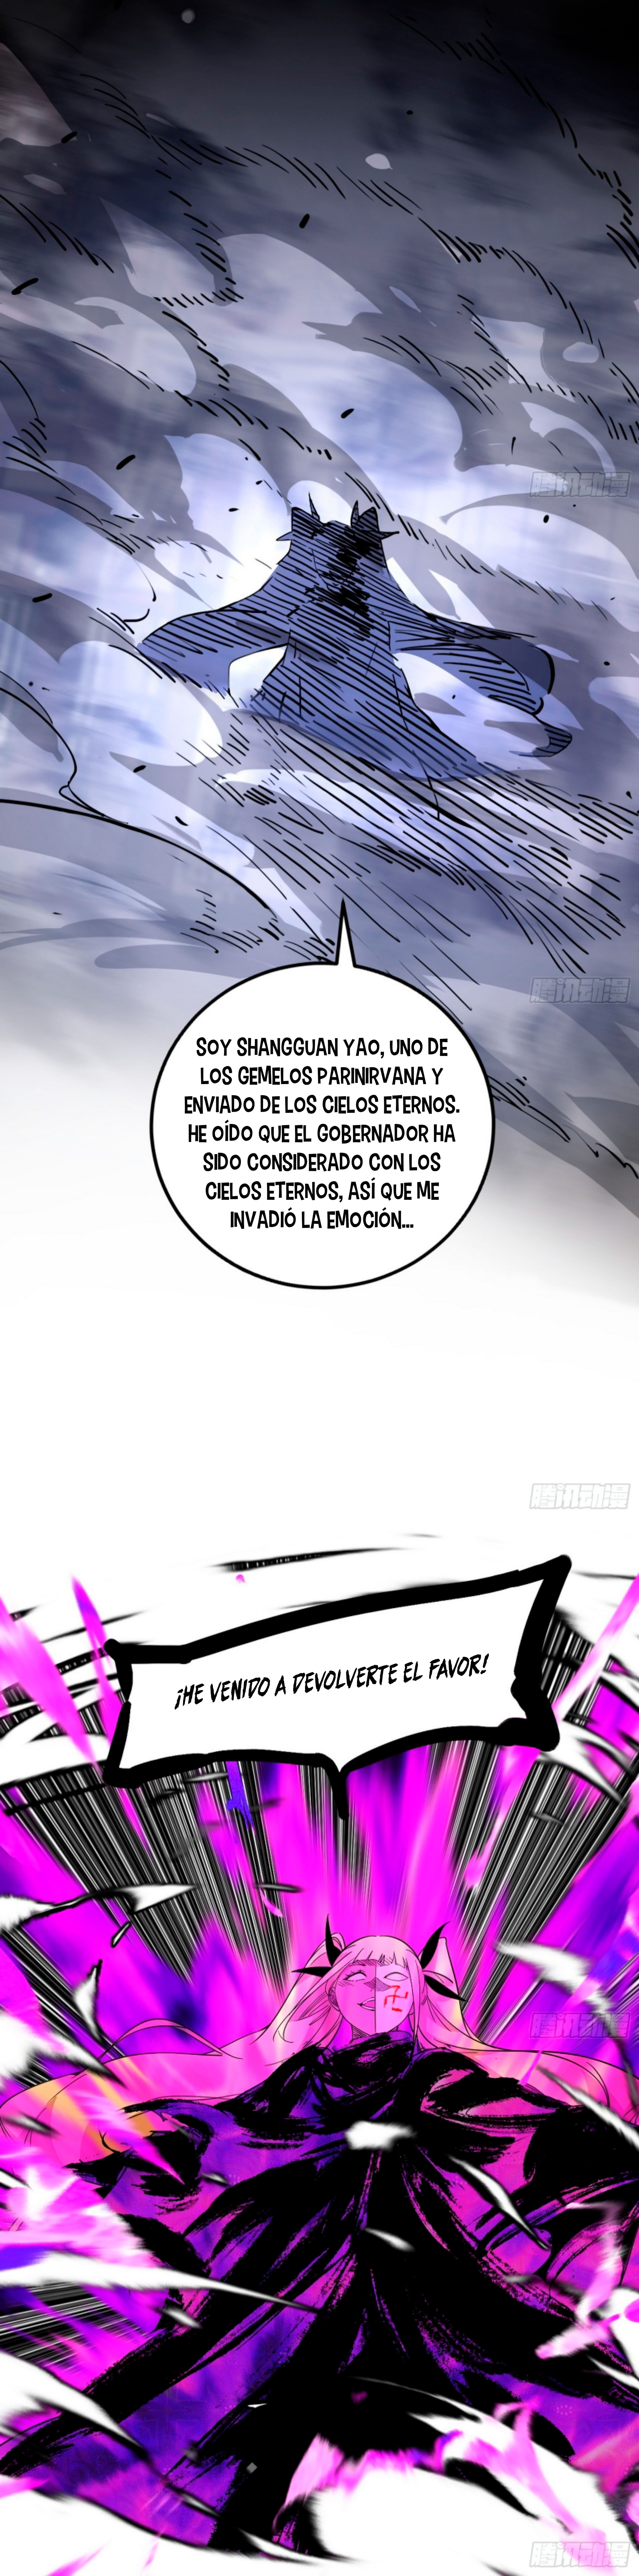 Manga Soy un dios maligno Chapter 407 image number 13